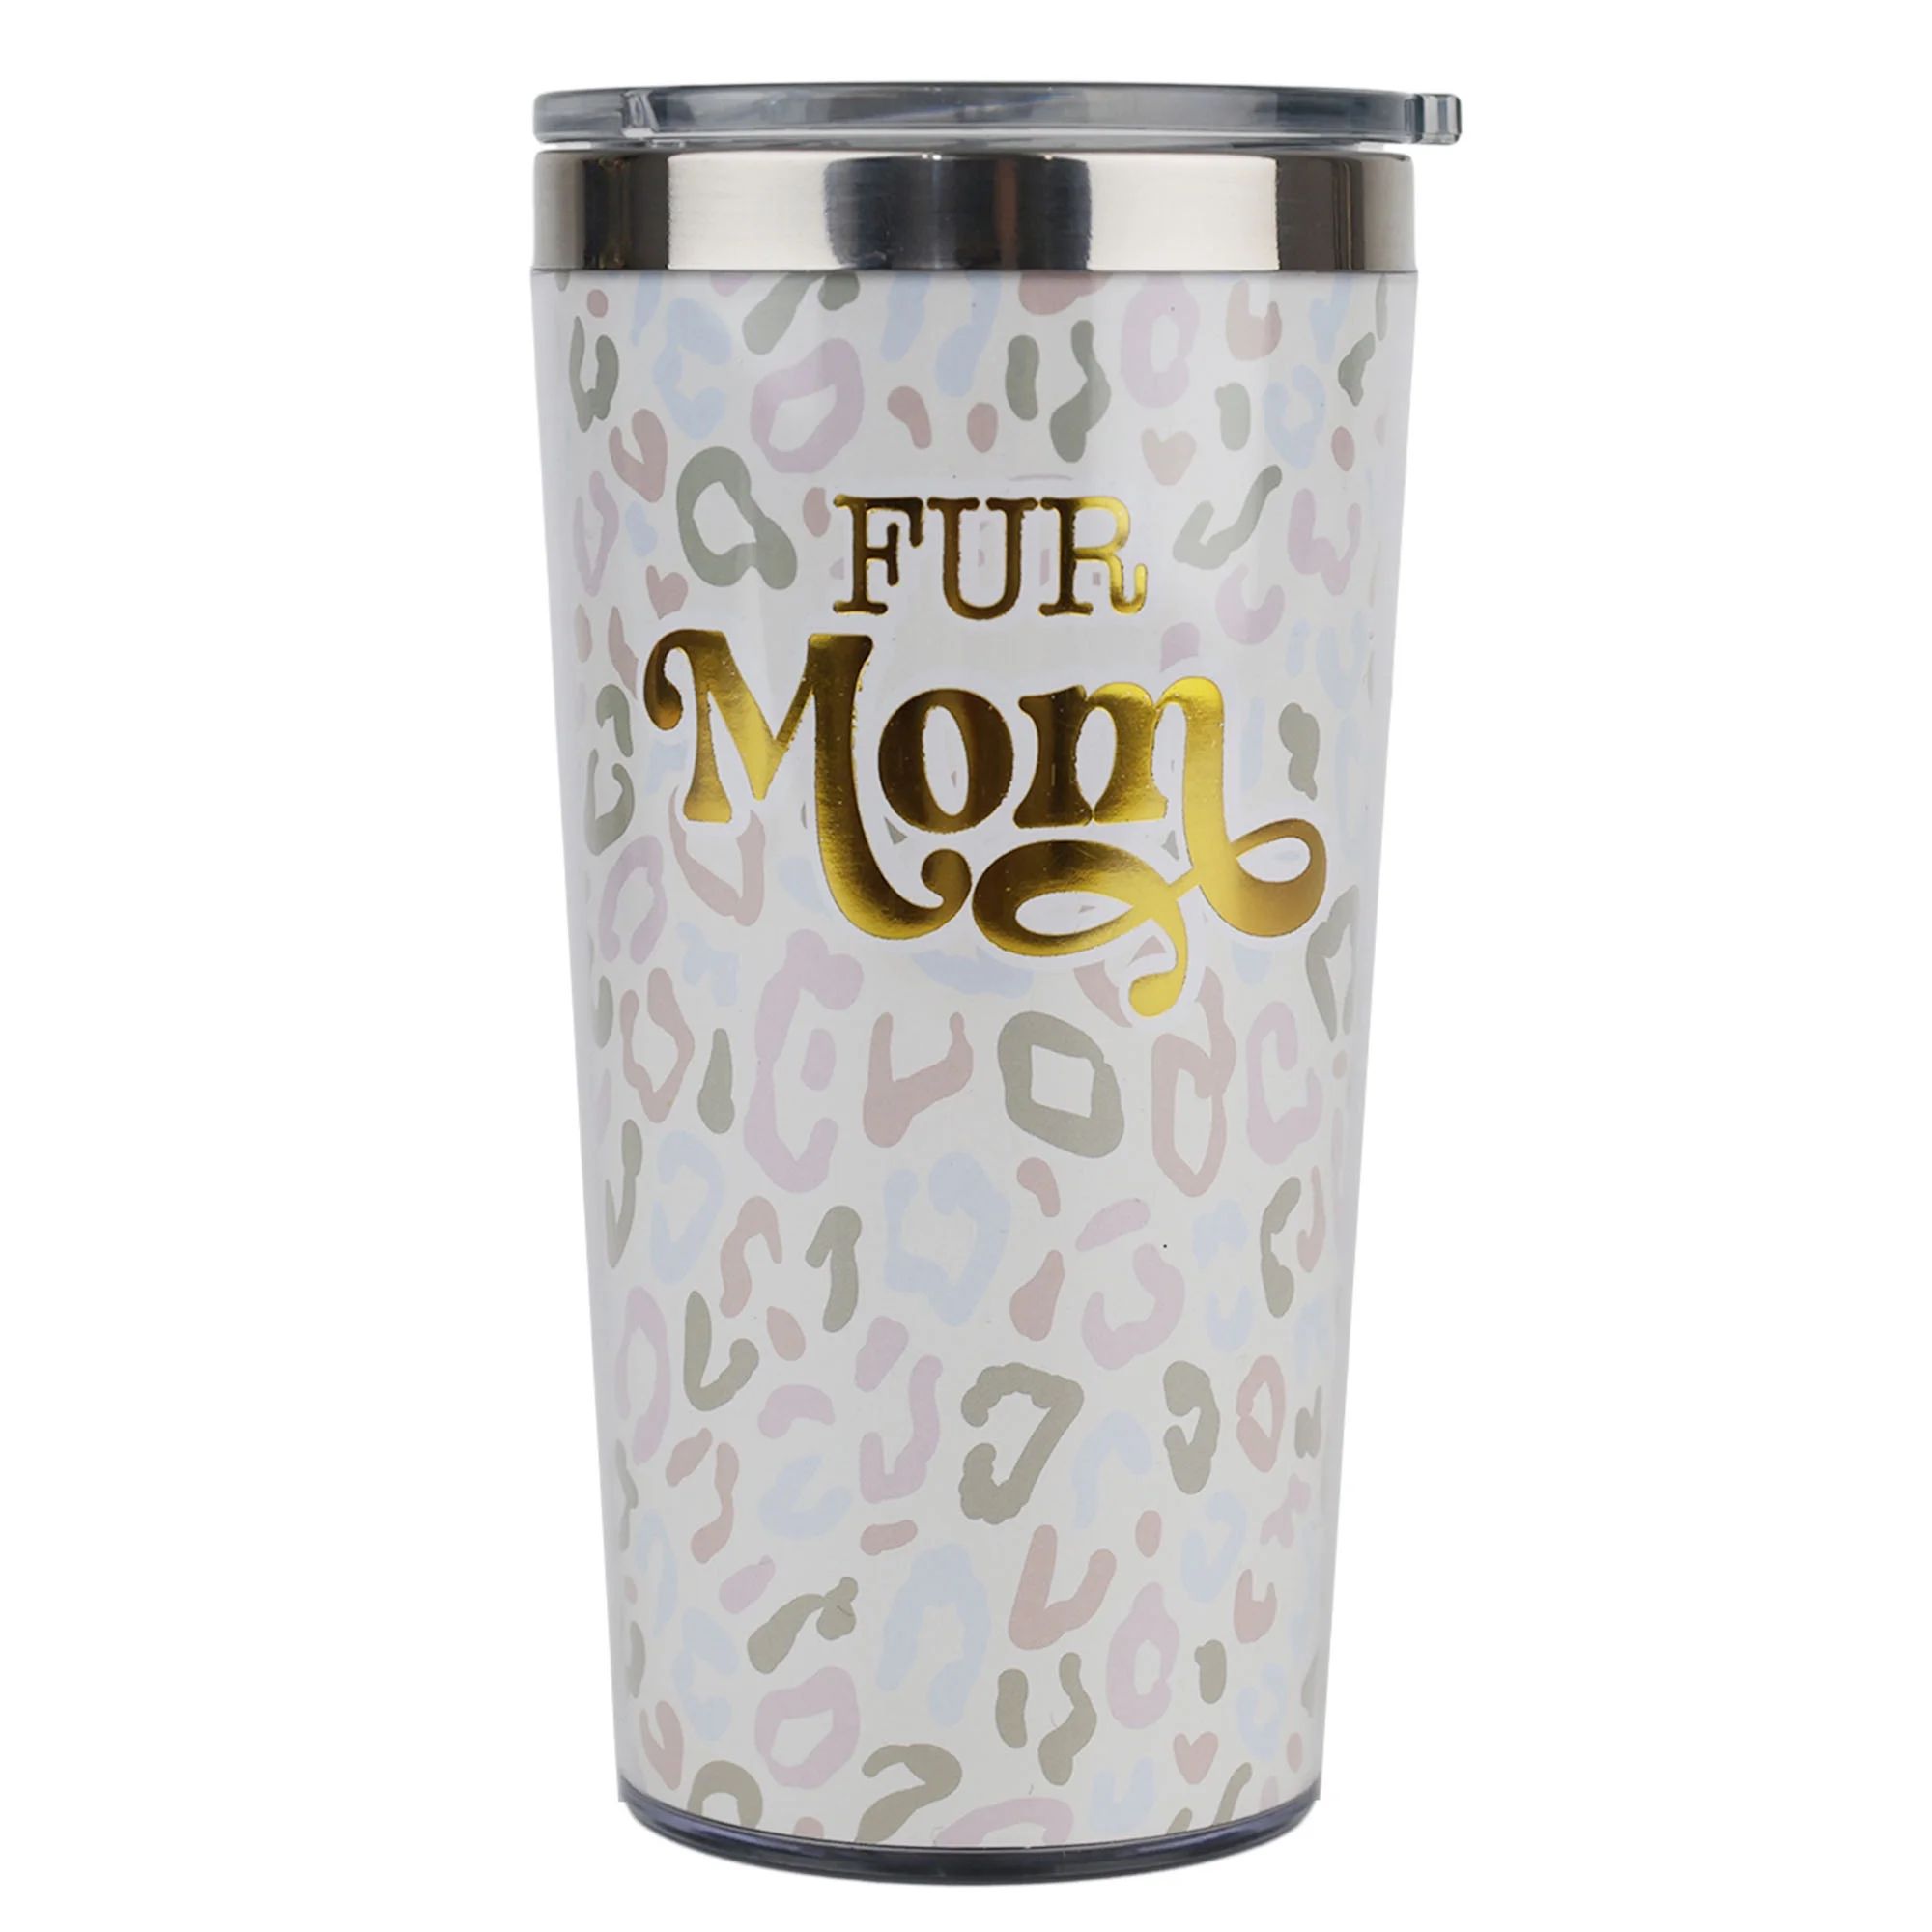 Fur Mom Coffee Tumbler with Lid, 16 oz, Mother's Day Gift, by Way To Celebrate, Multi Color | Walmart (US)